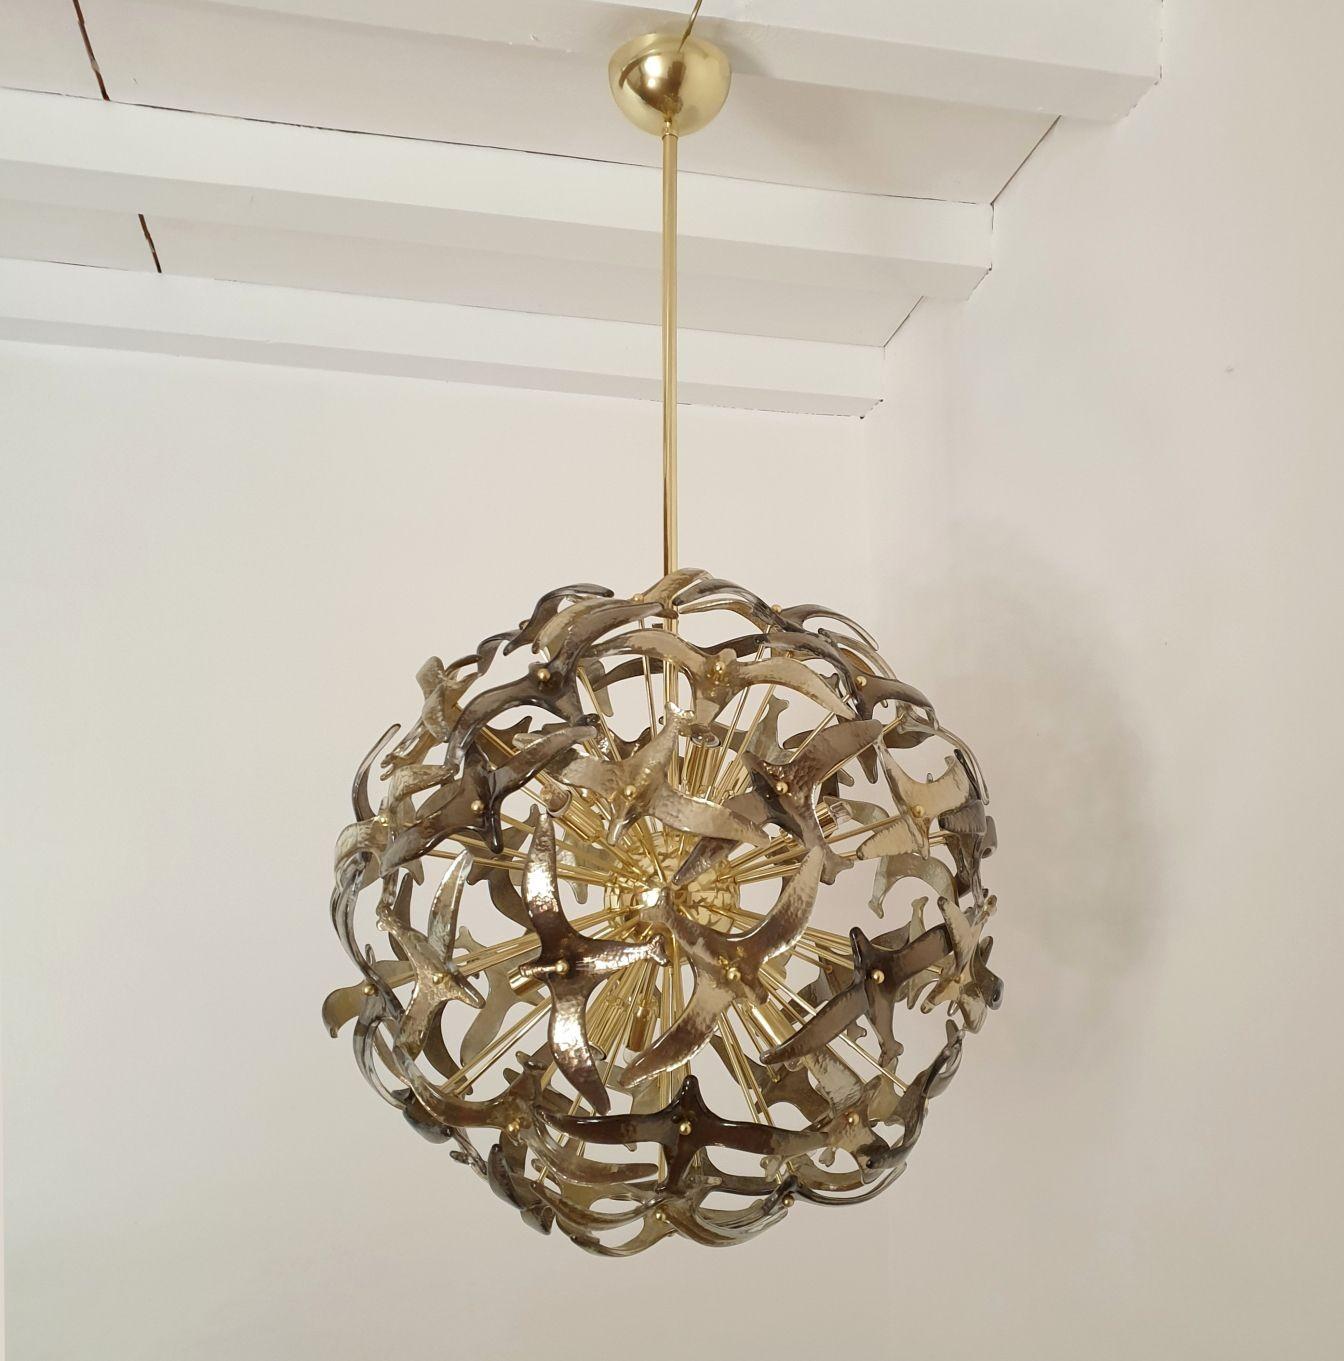 Large Murano glass sputnik chandelier attributed to Mazzega, circa 1980s, Italy.
The chandelier has a polished brass frame, with 12 lights, rewired for the US with Candelabra base sockets or E12.
The Murano glasses represent stylized birds in two